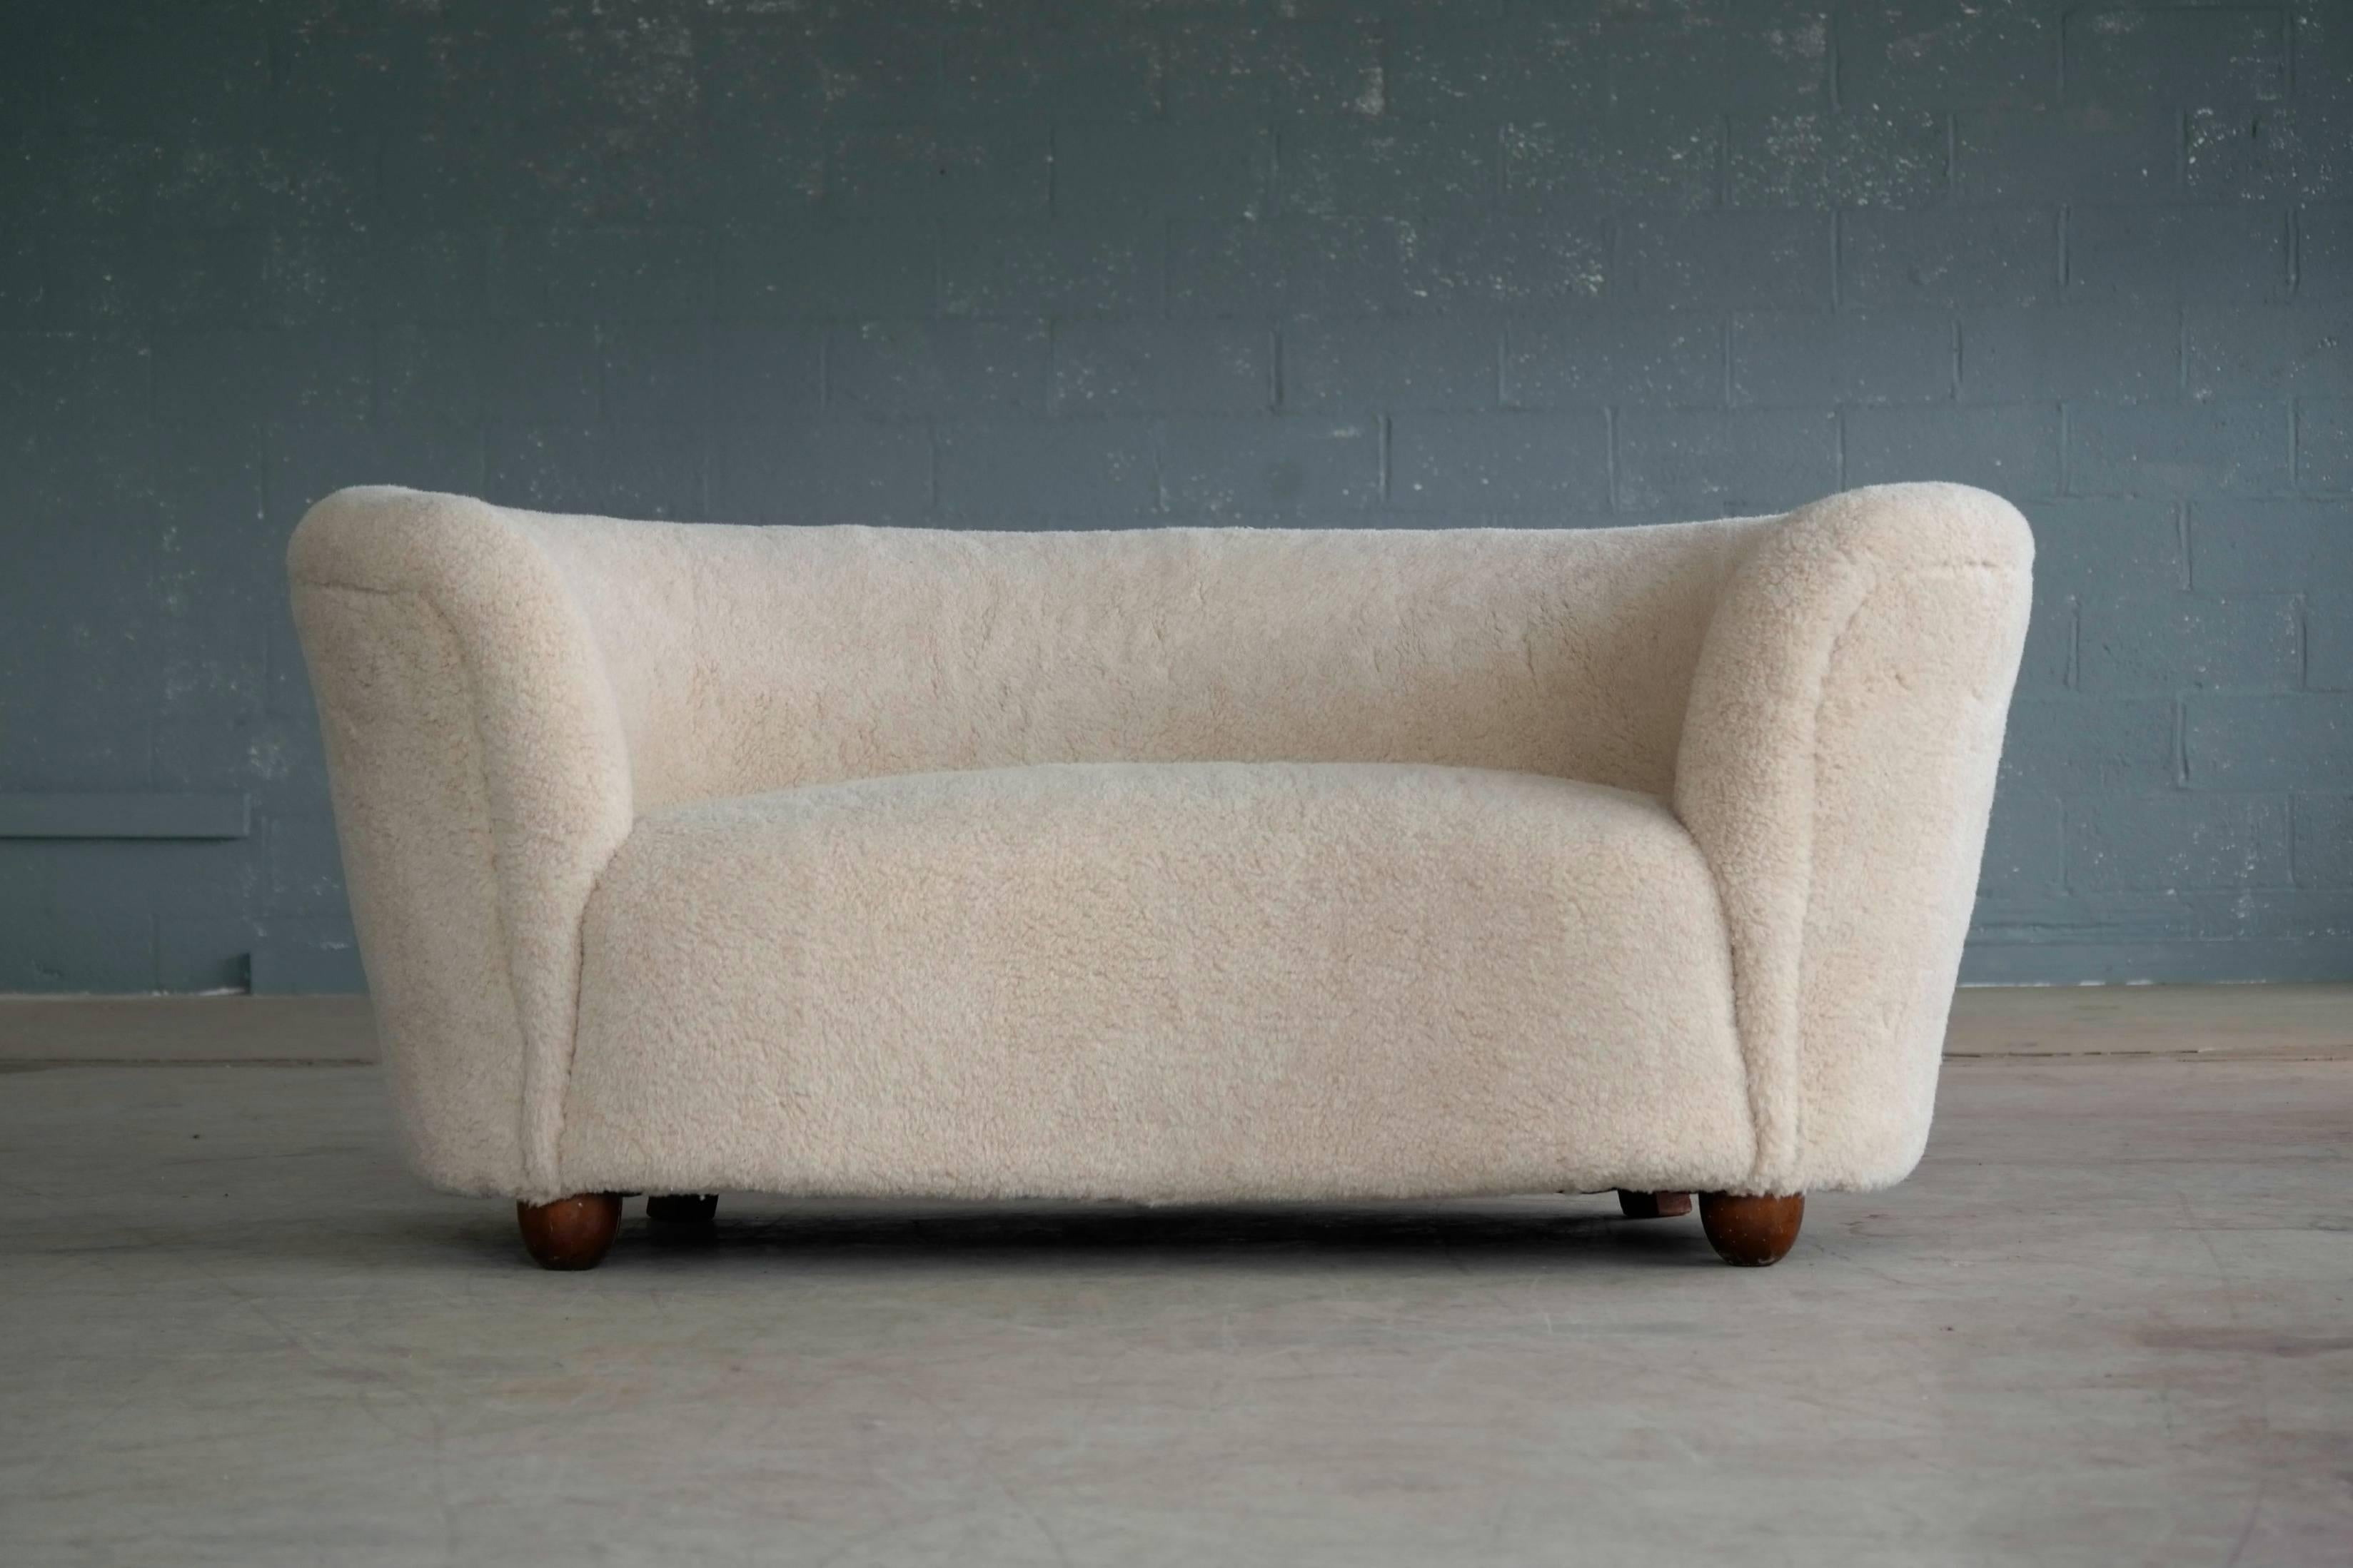 Banana shaped Viggo Boesen style curved two-seat sofa or loveseat attributed to Slagelse Møbelværk. This sofa will make strong statement in any room. Beautiful round lines and iconic ball feet. Fully refurbished and newly upholstered with beige